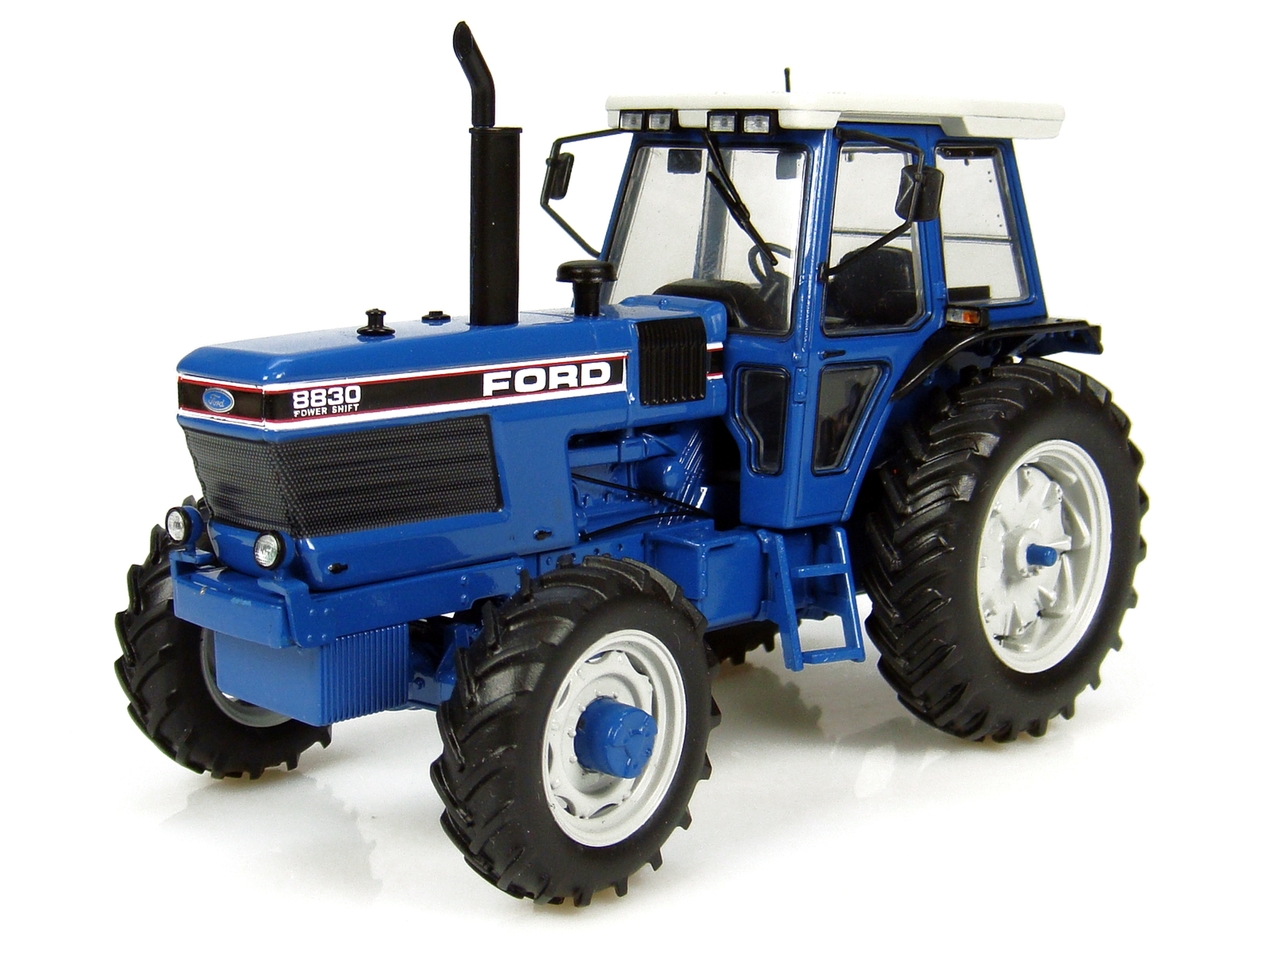 1989 Ford 8830 Power Shift Tractor 1/32 Diecast Model By Universal Hobbies